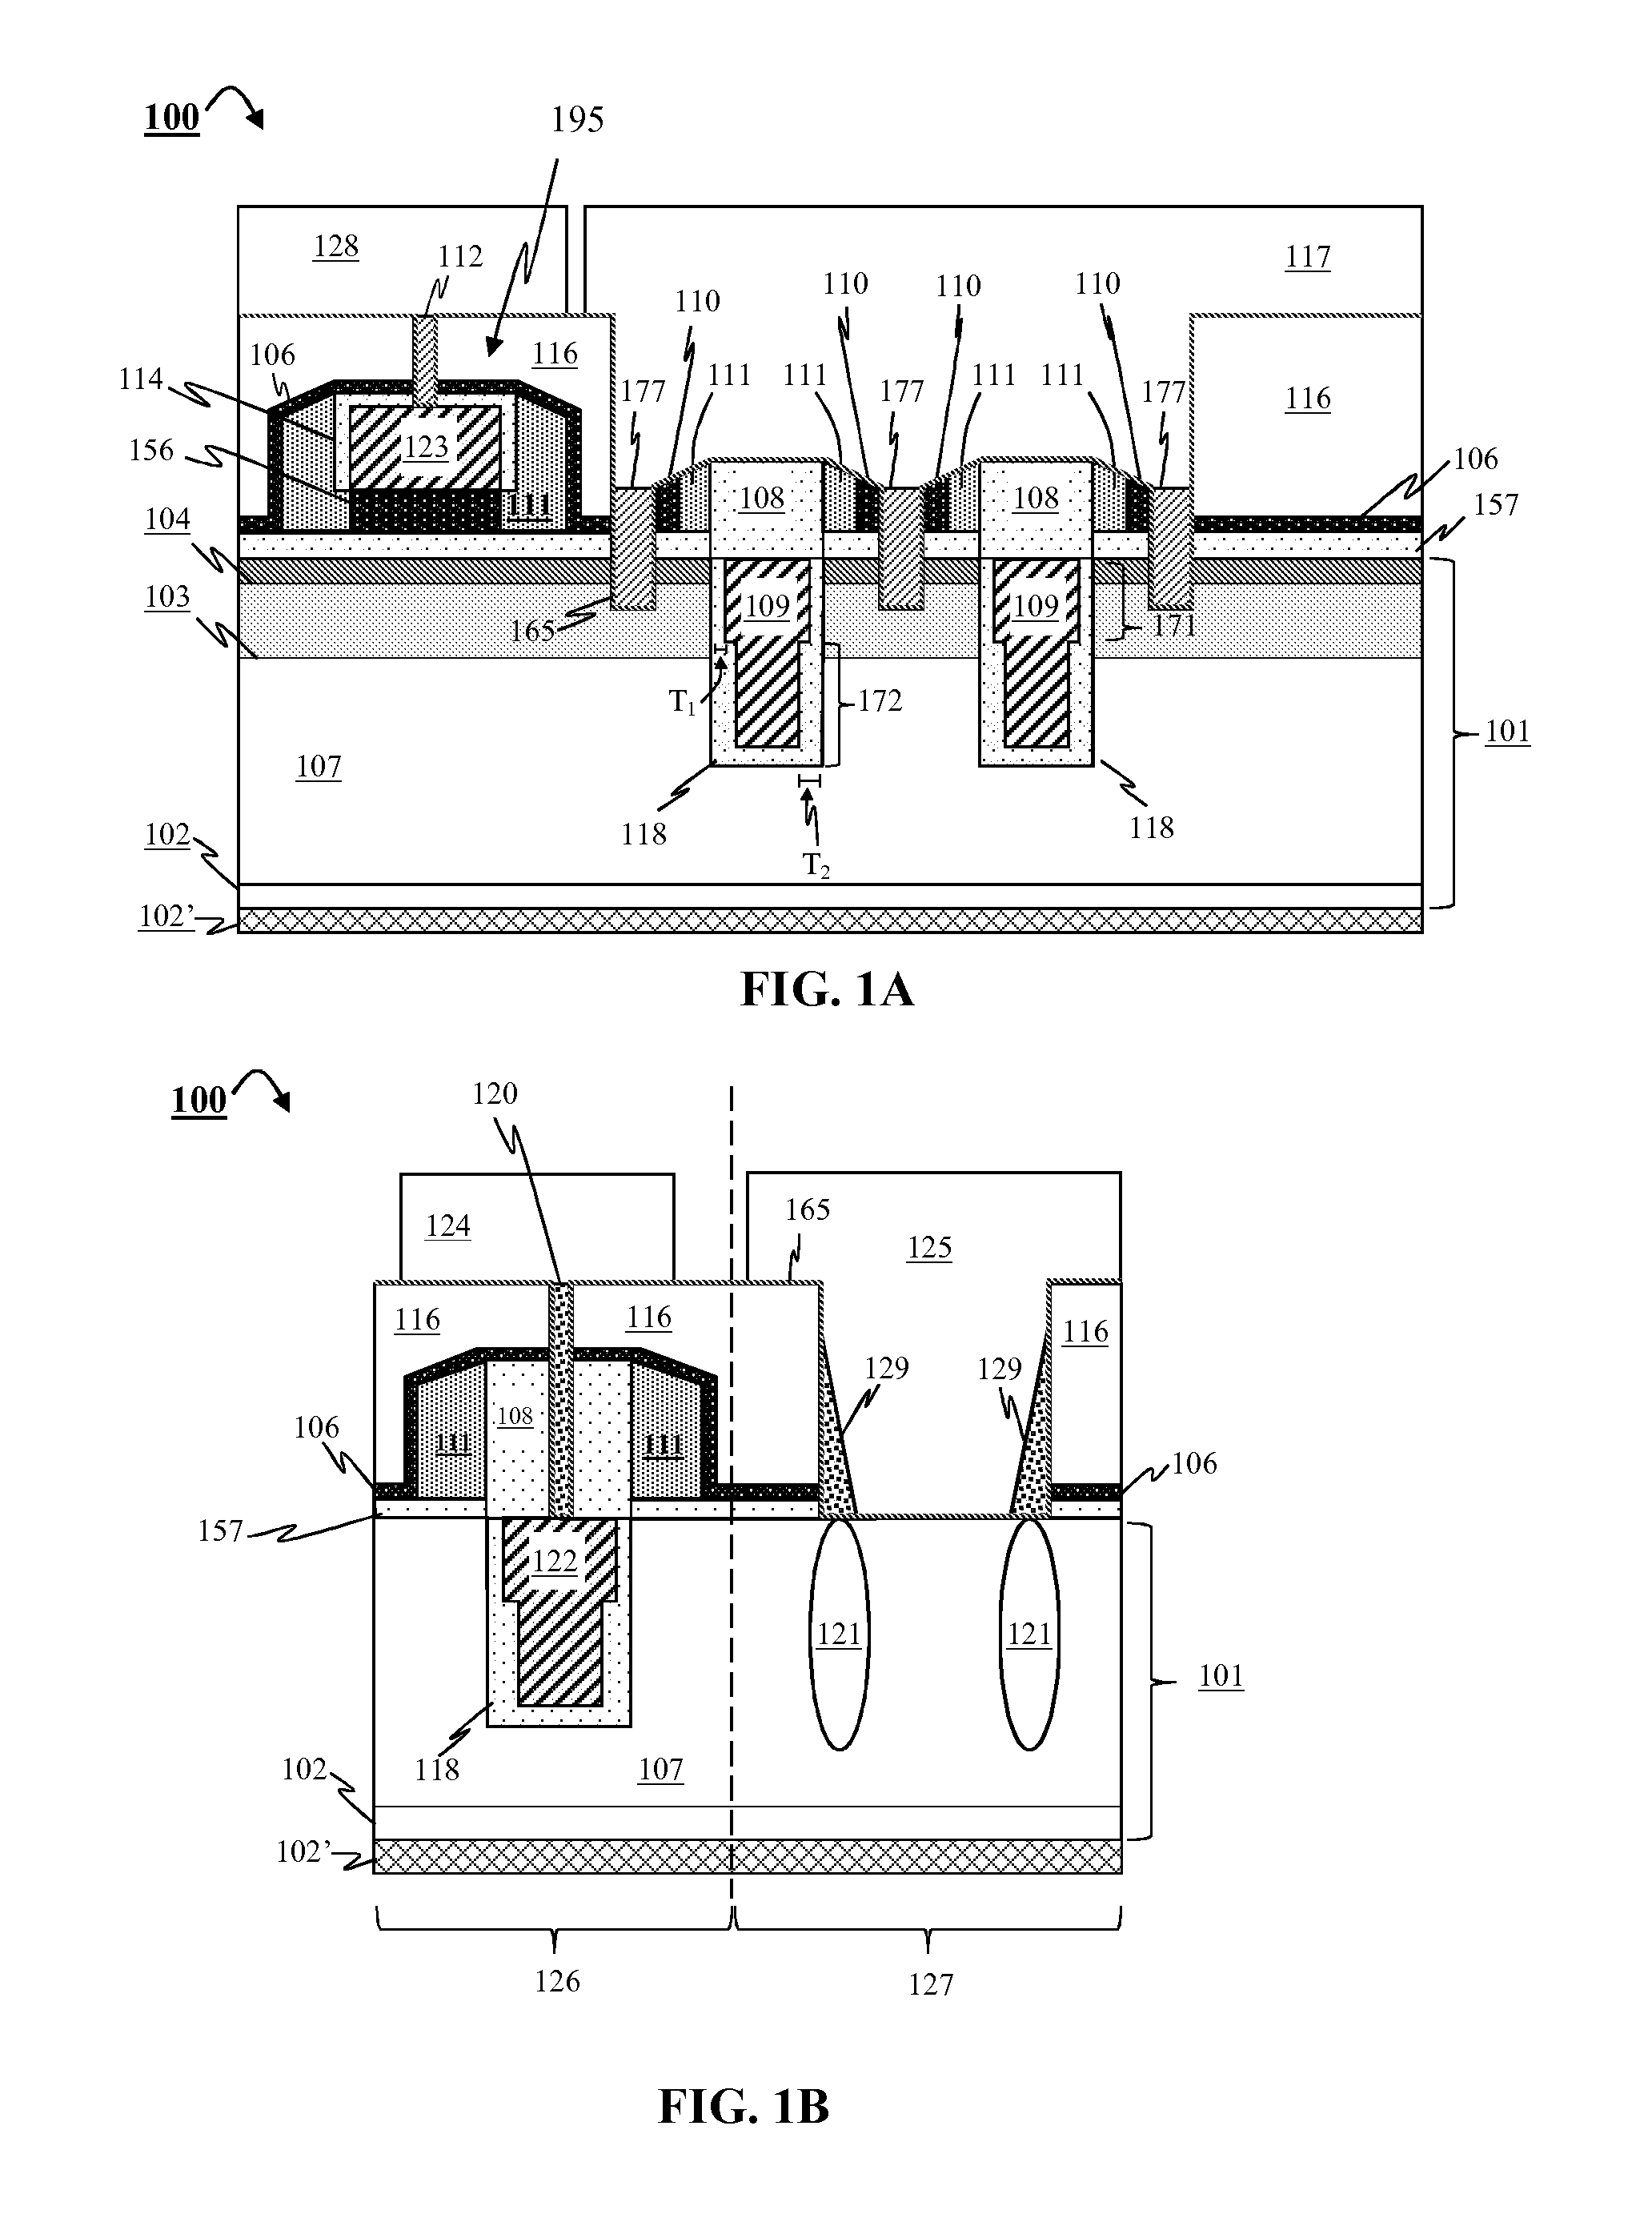 High density trench-based power MOSFETs with self-aligned active contacts and method for making such devices